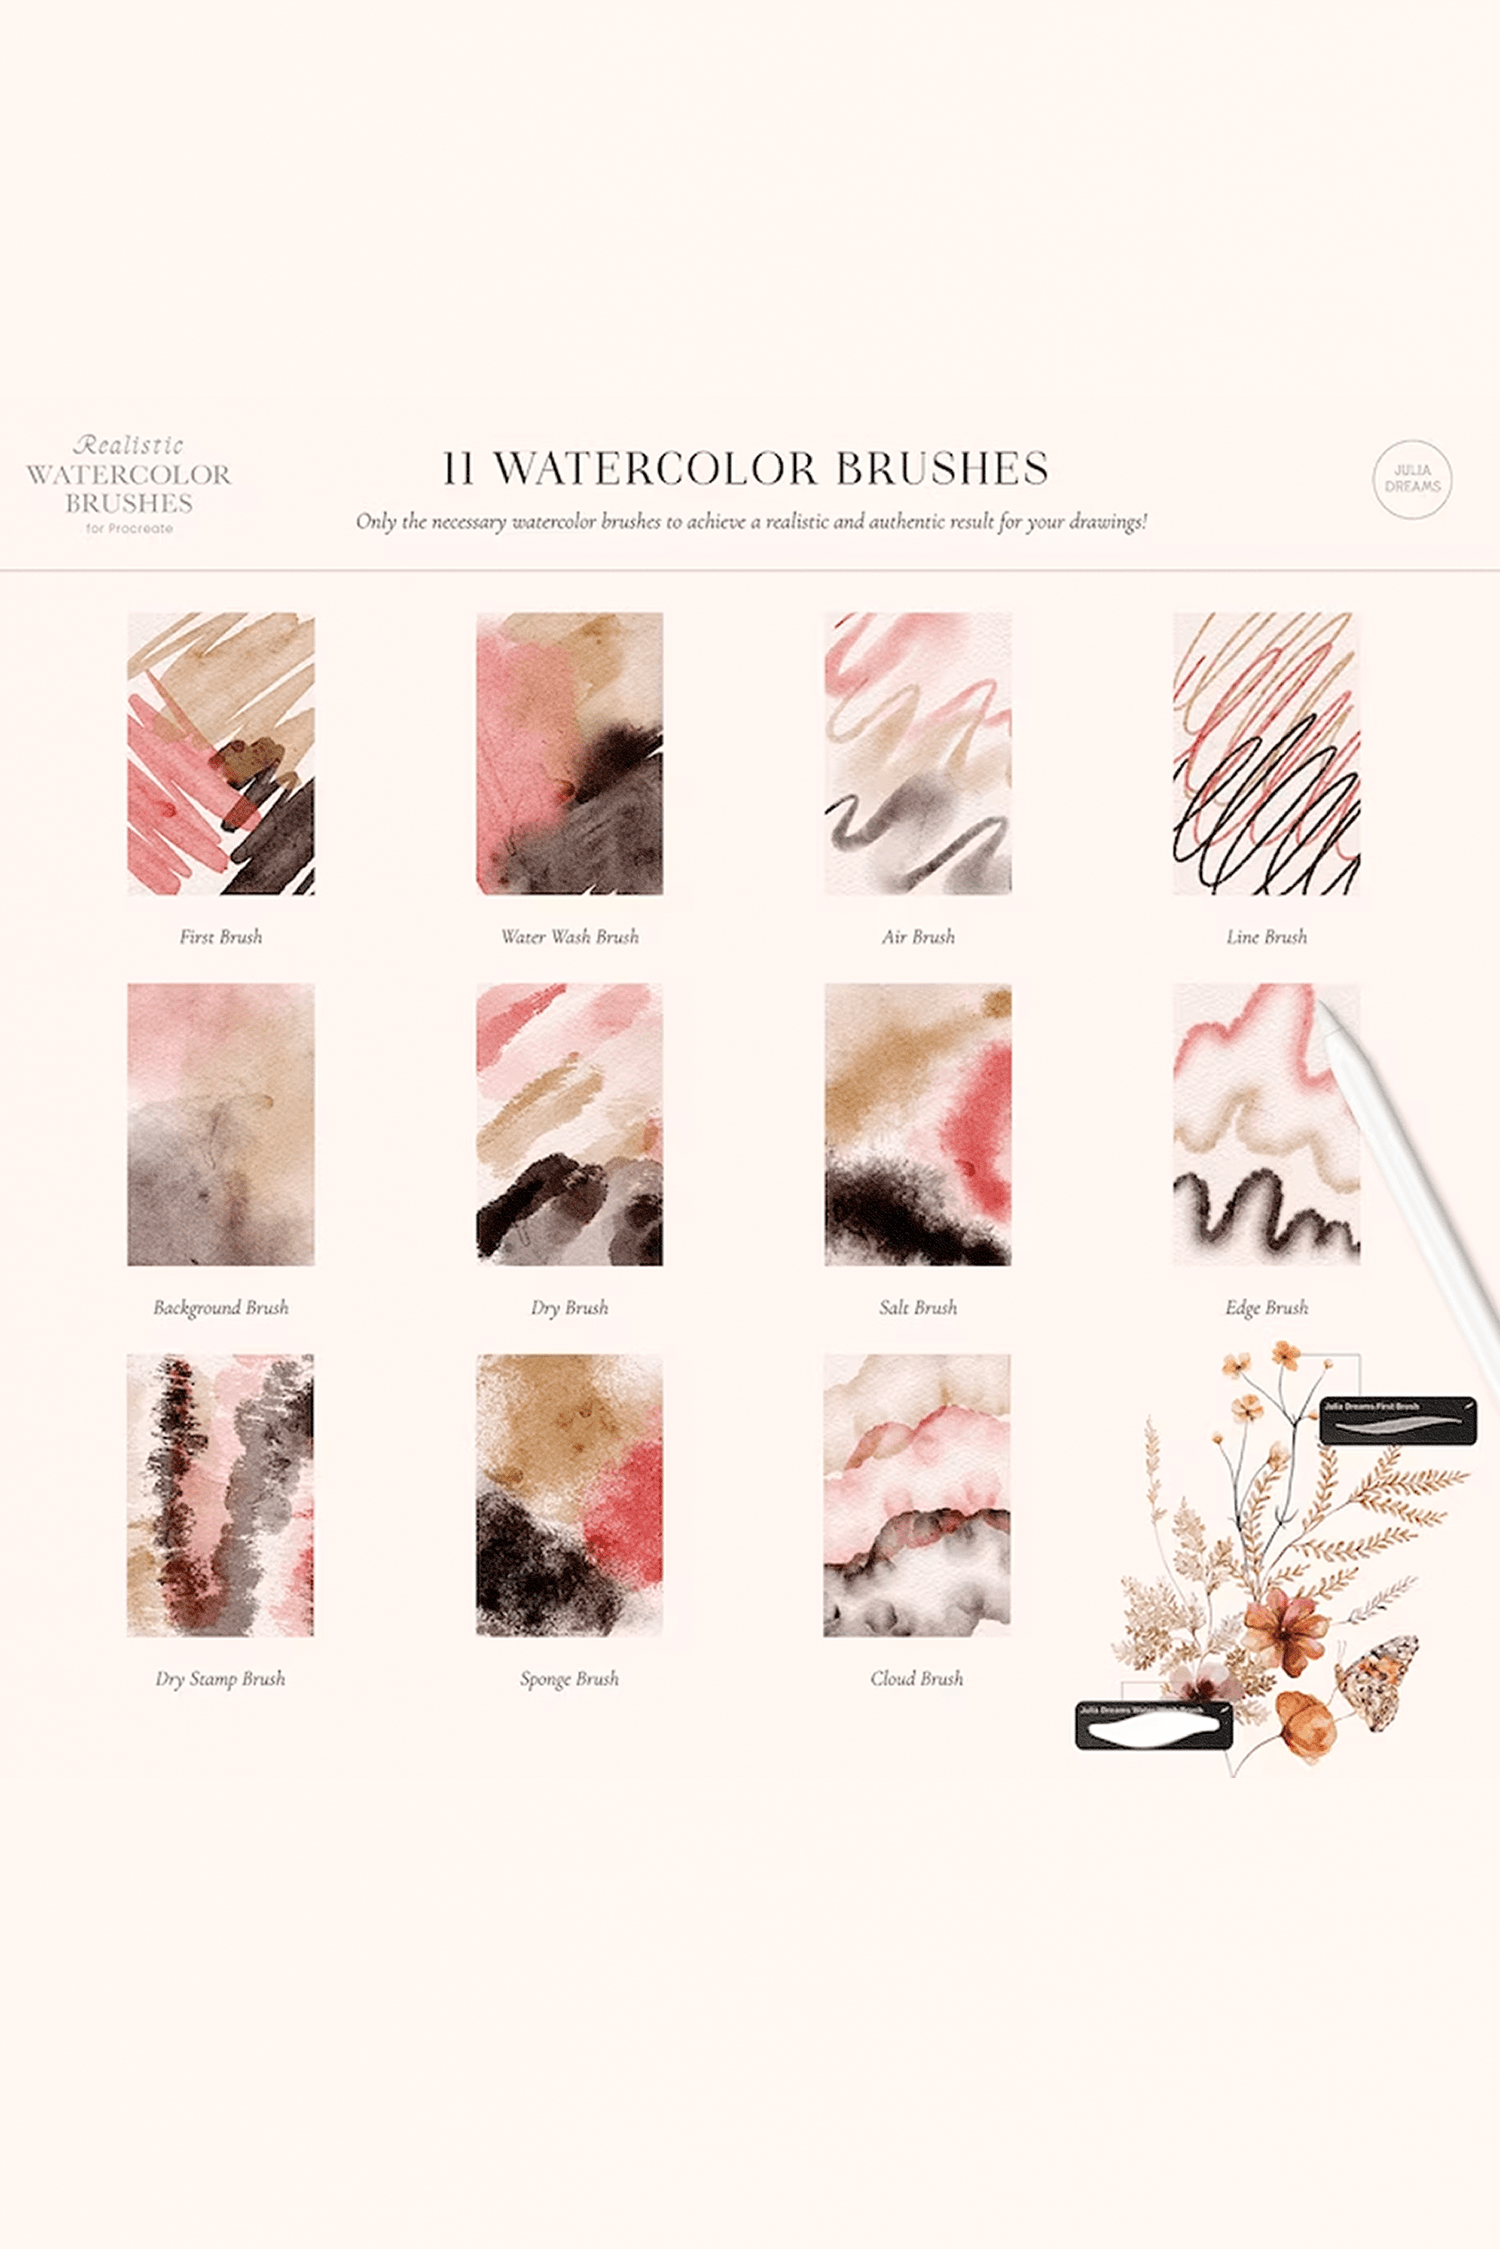 Realistic Watercolor Brushes for Procreate by Julia Dreams